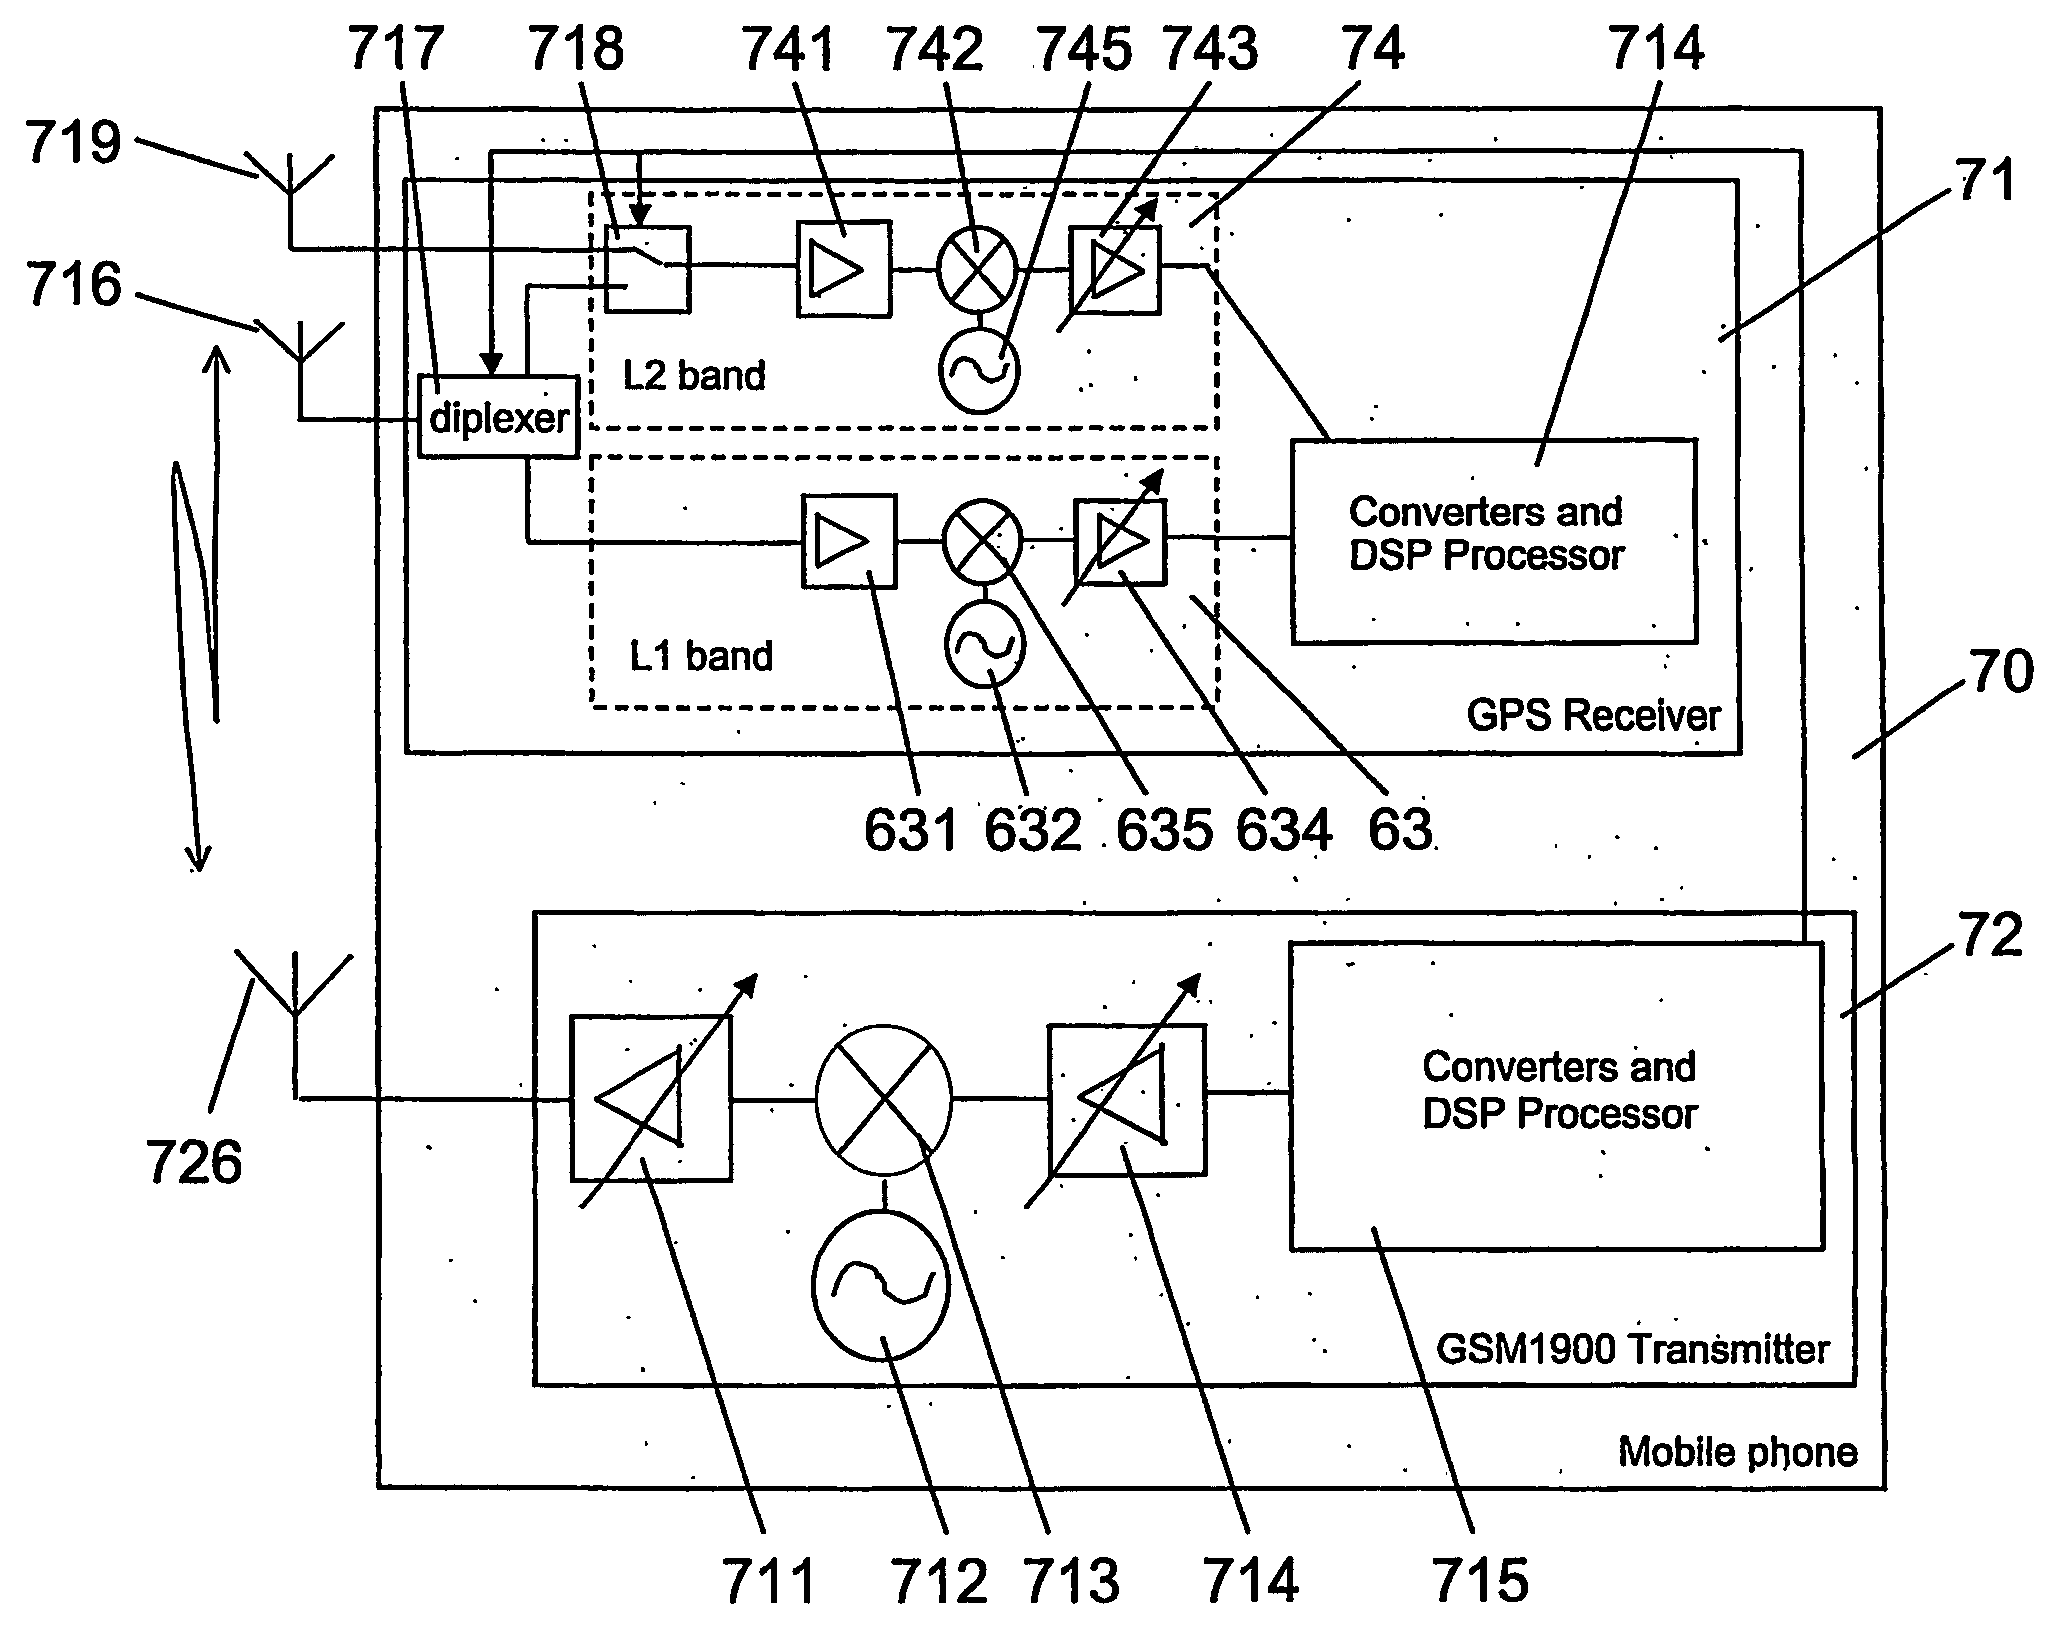 Performance of a receiver in interfering conditions